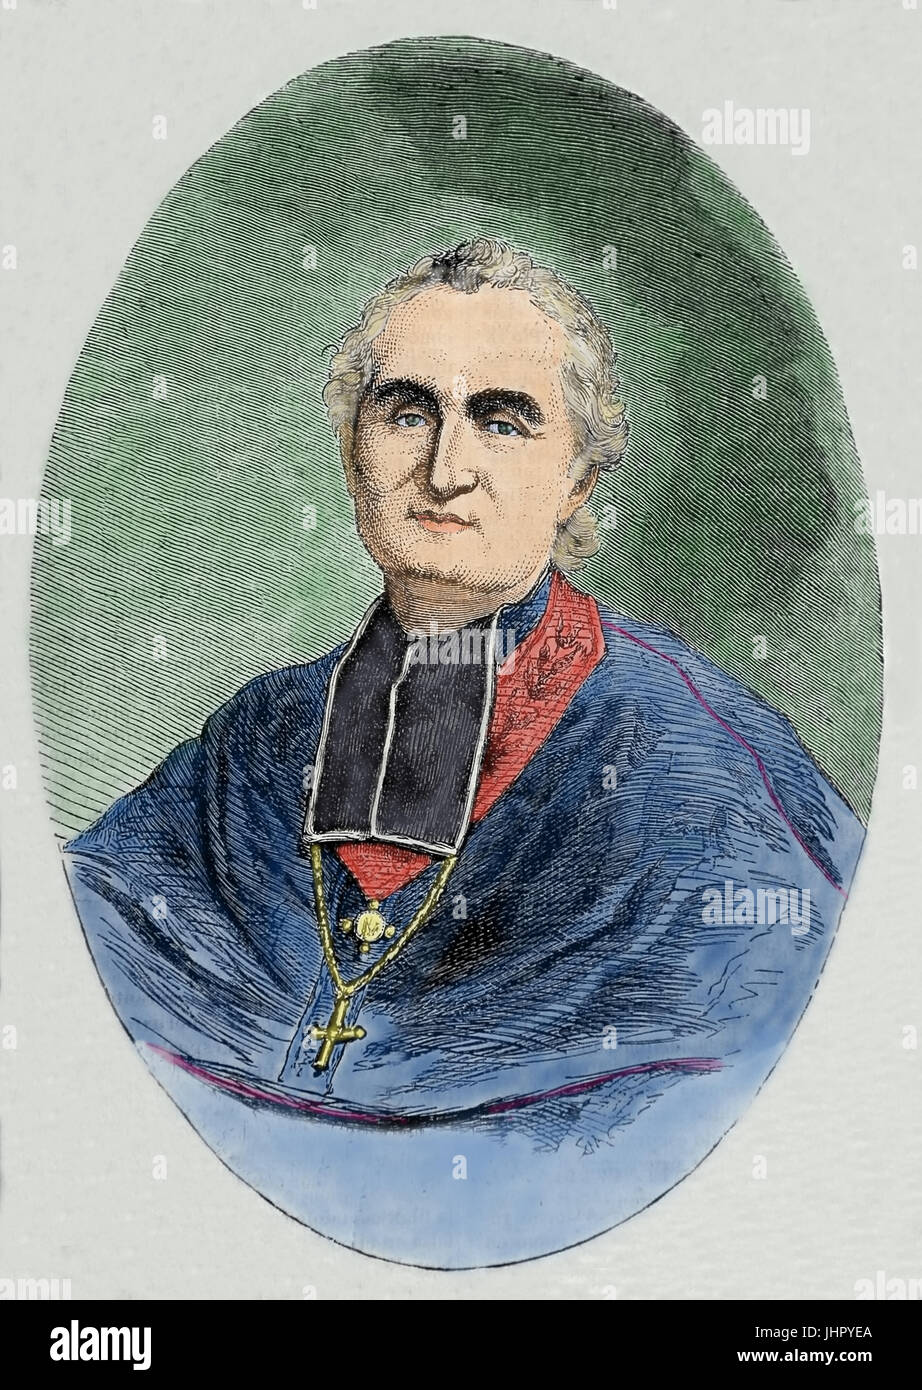 Felix Dupanloup (1802-1878). Mgr.Felix Dupanloup. French ecclesiastic, Bishop of Orleans and member of the Académie française. Stock Photo